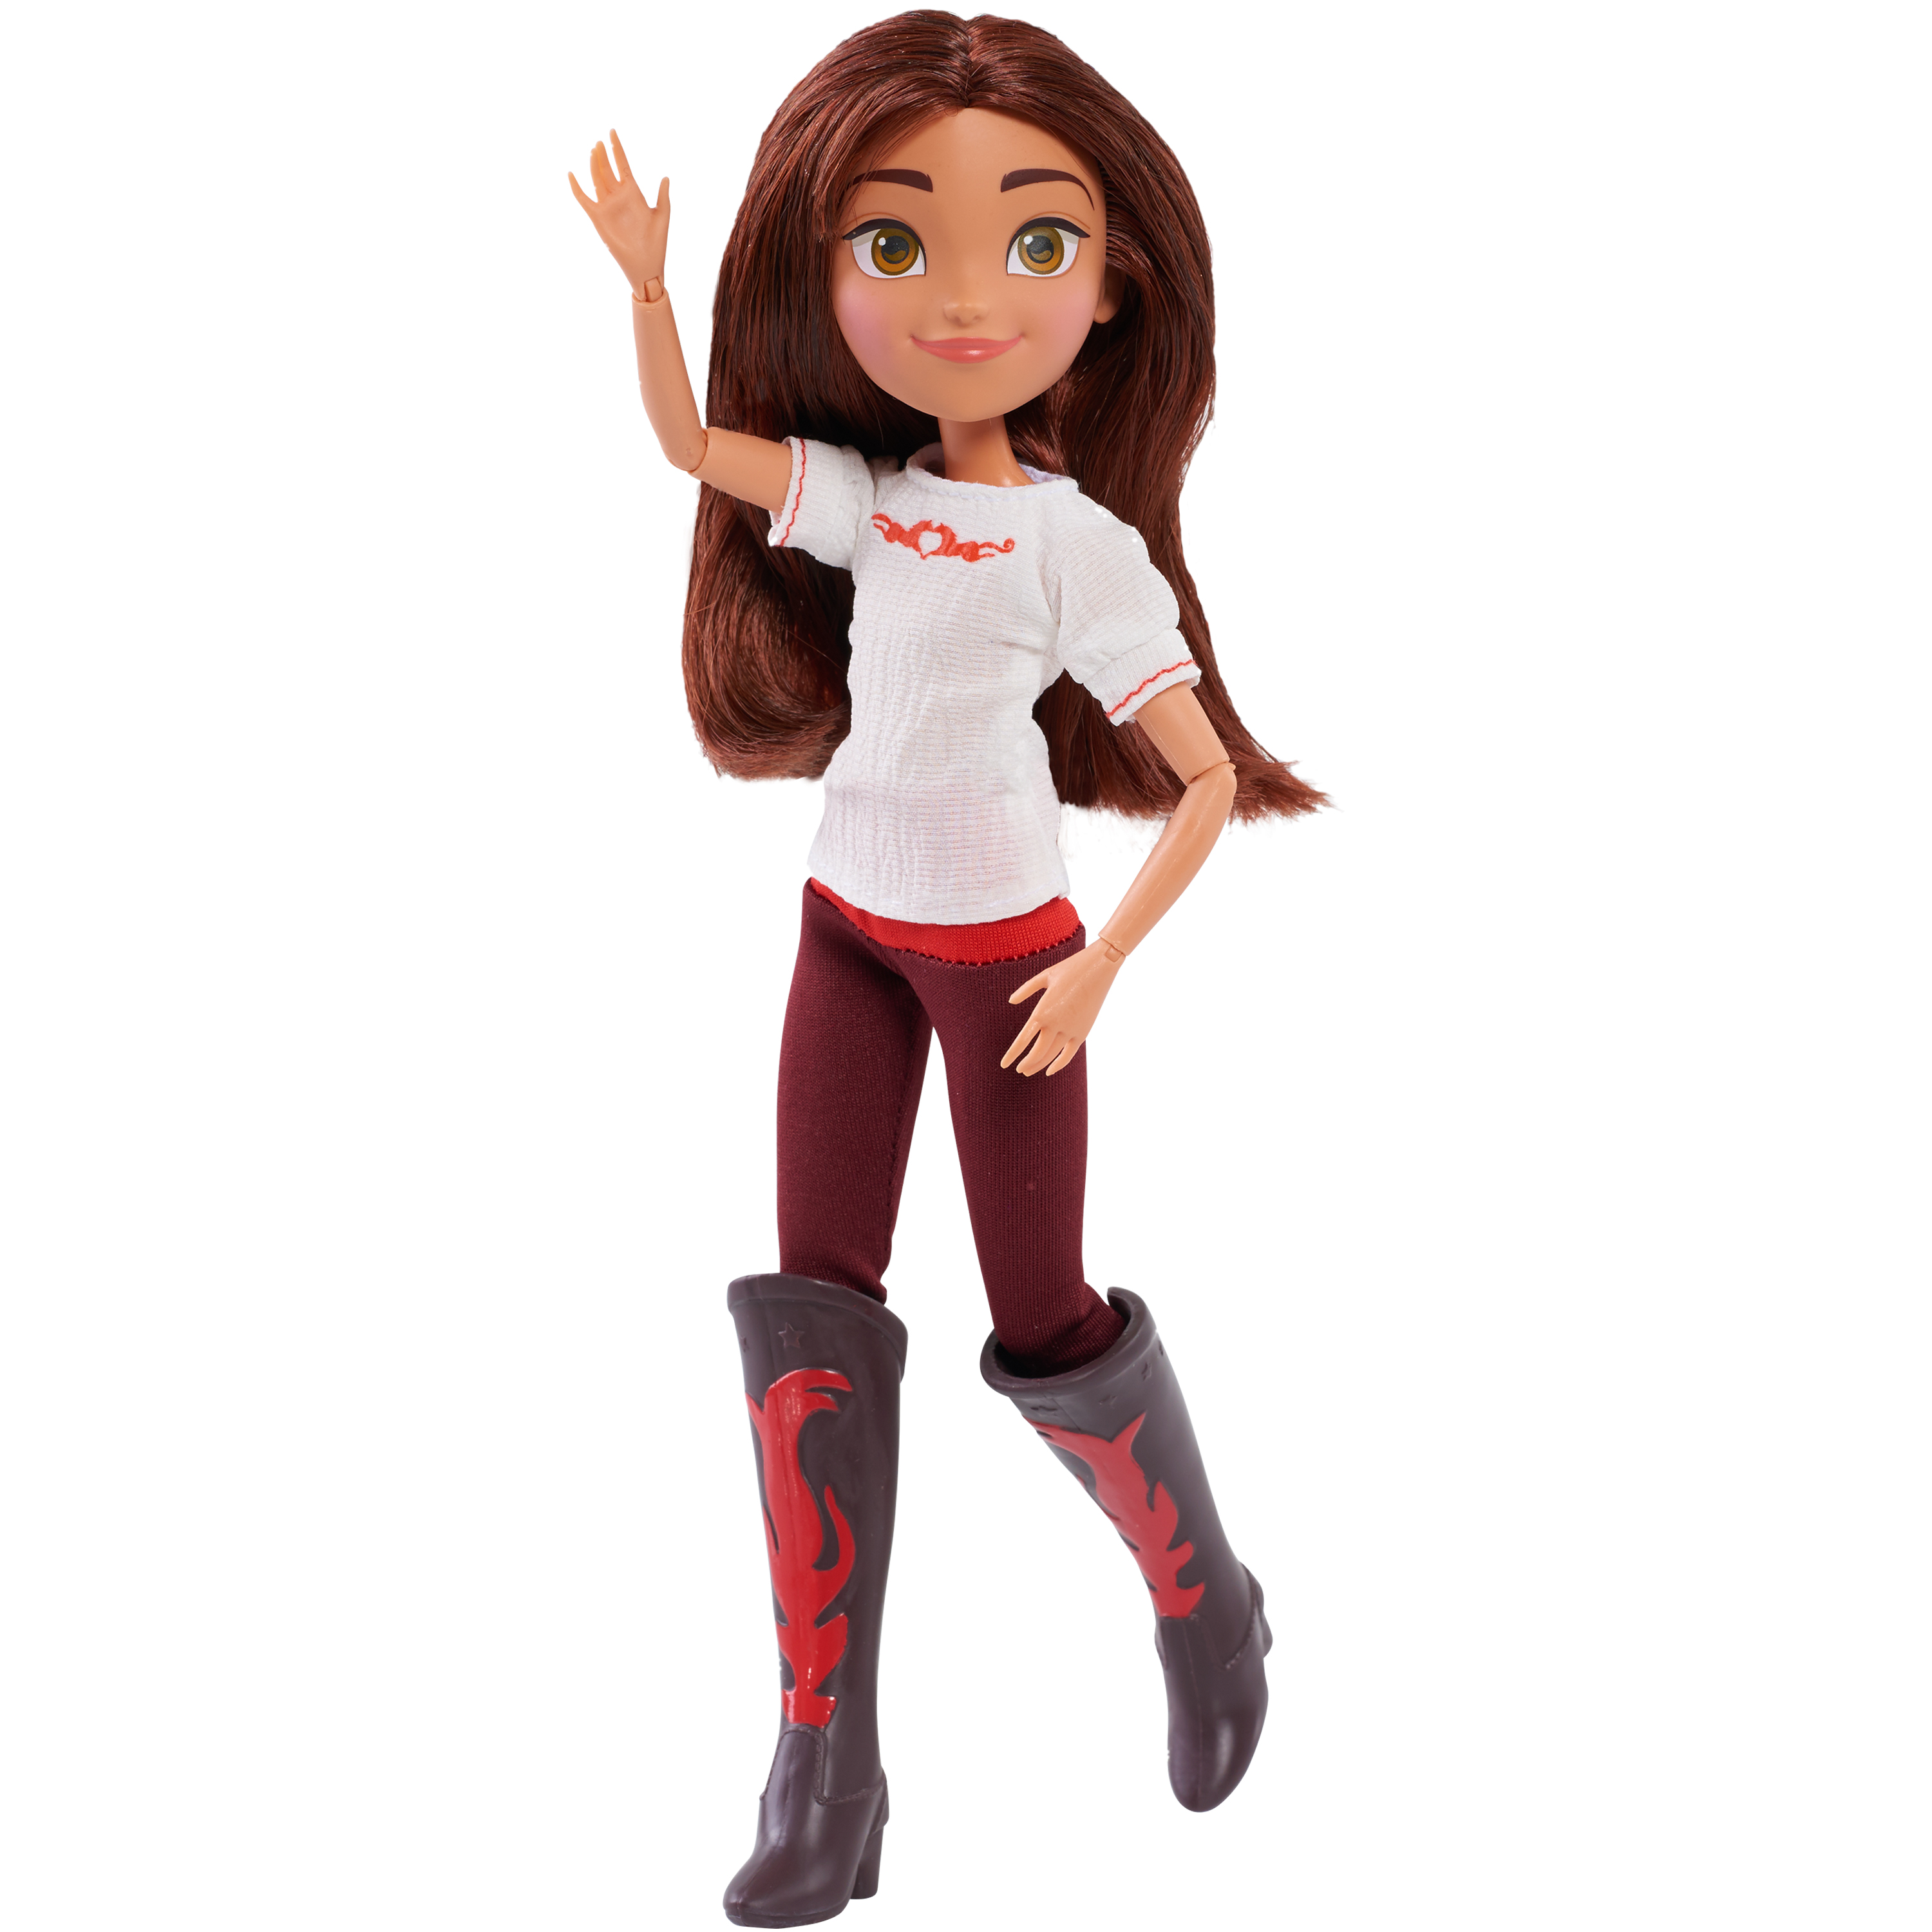 Spirit Riding Free 11.5" Deluxe Fashion Doll - Lucky - image 1 of 2